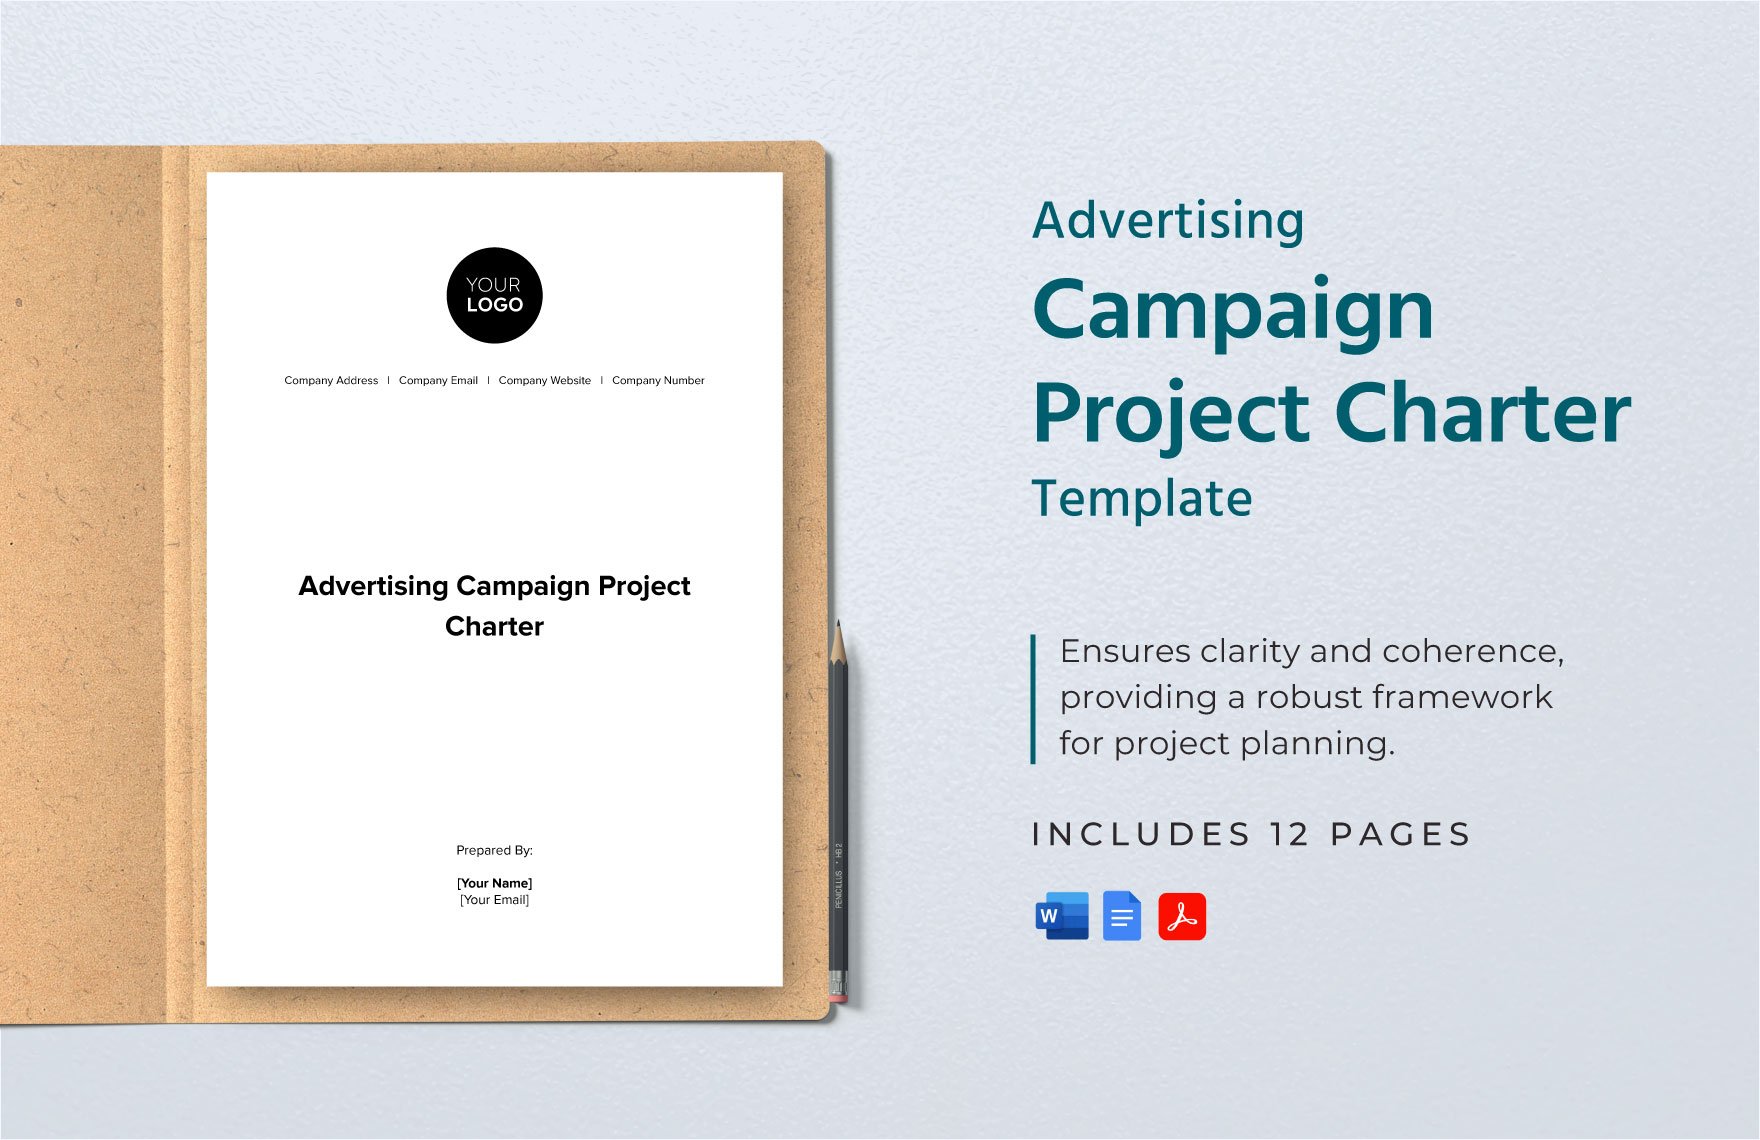 Advertising Campaign Project Charter Template in Word, Google Docs, PDF